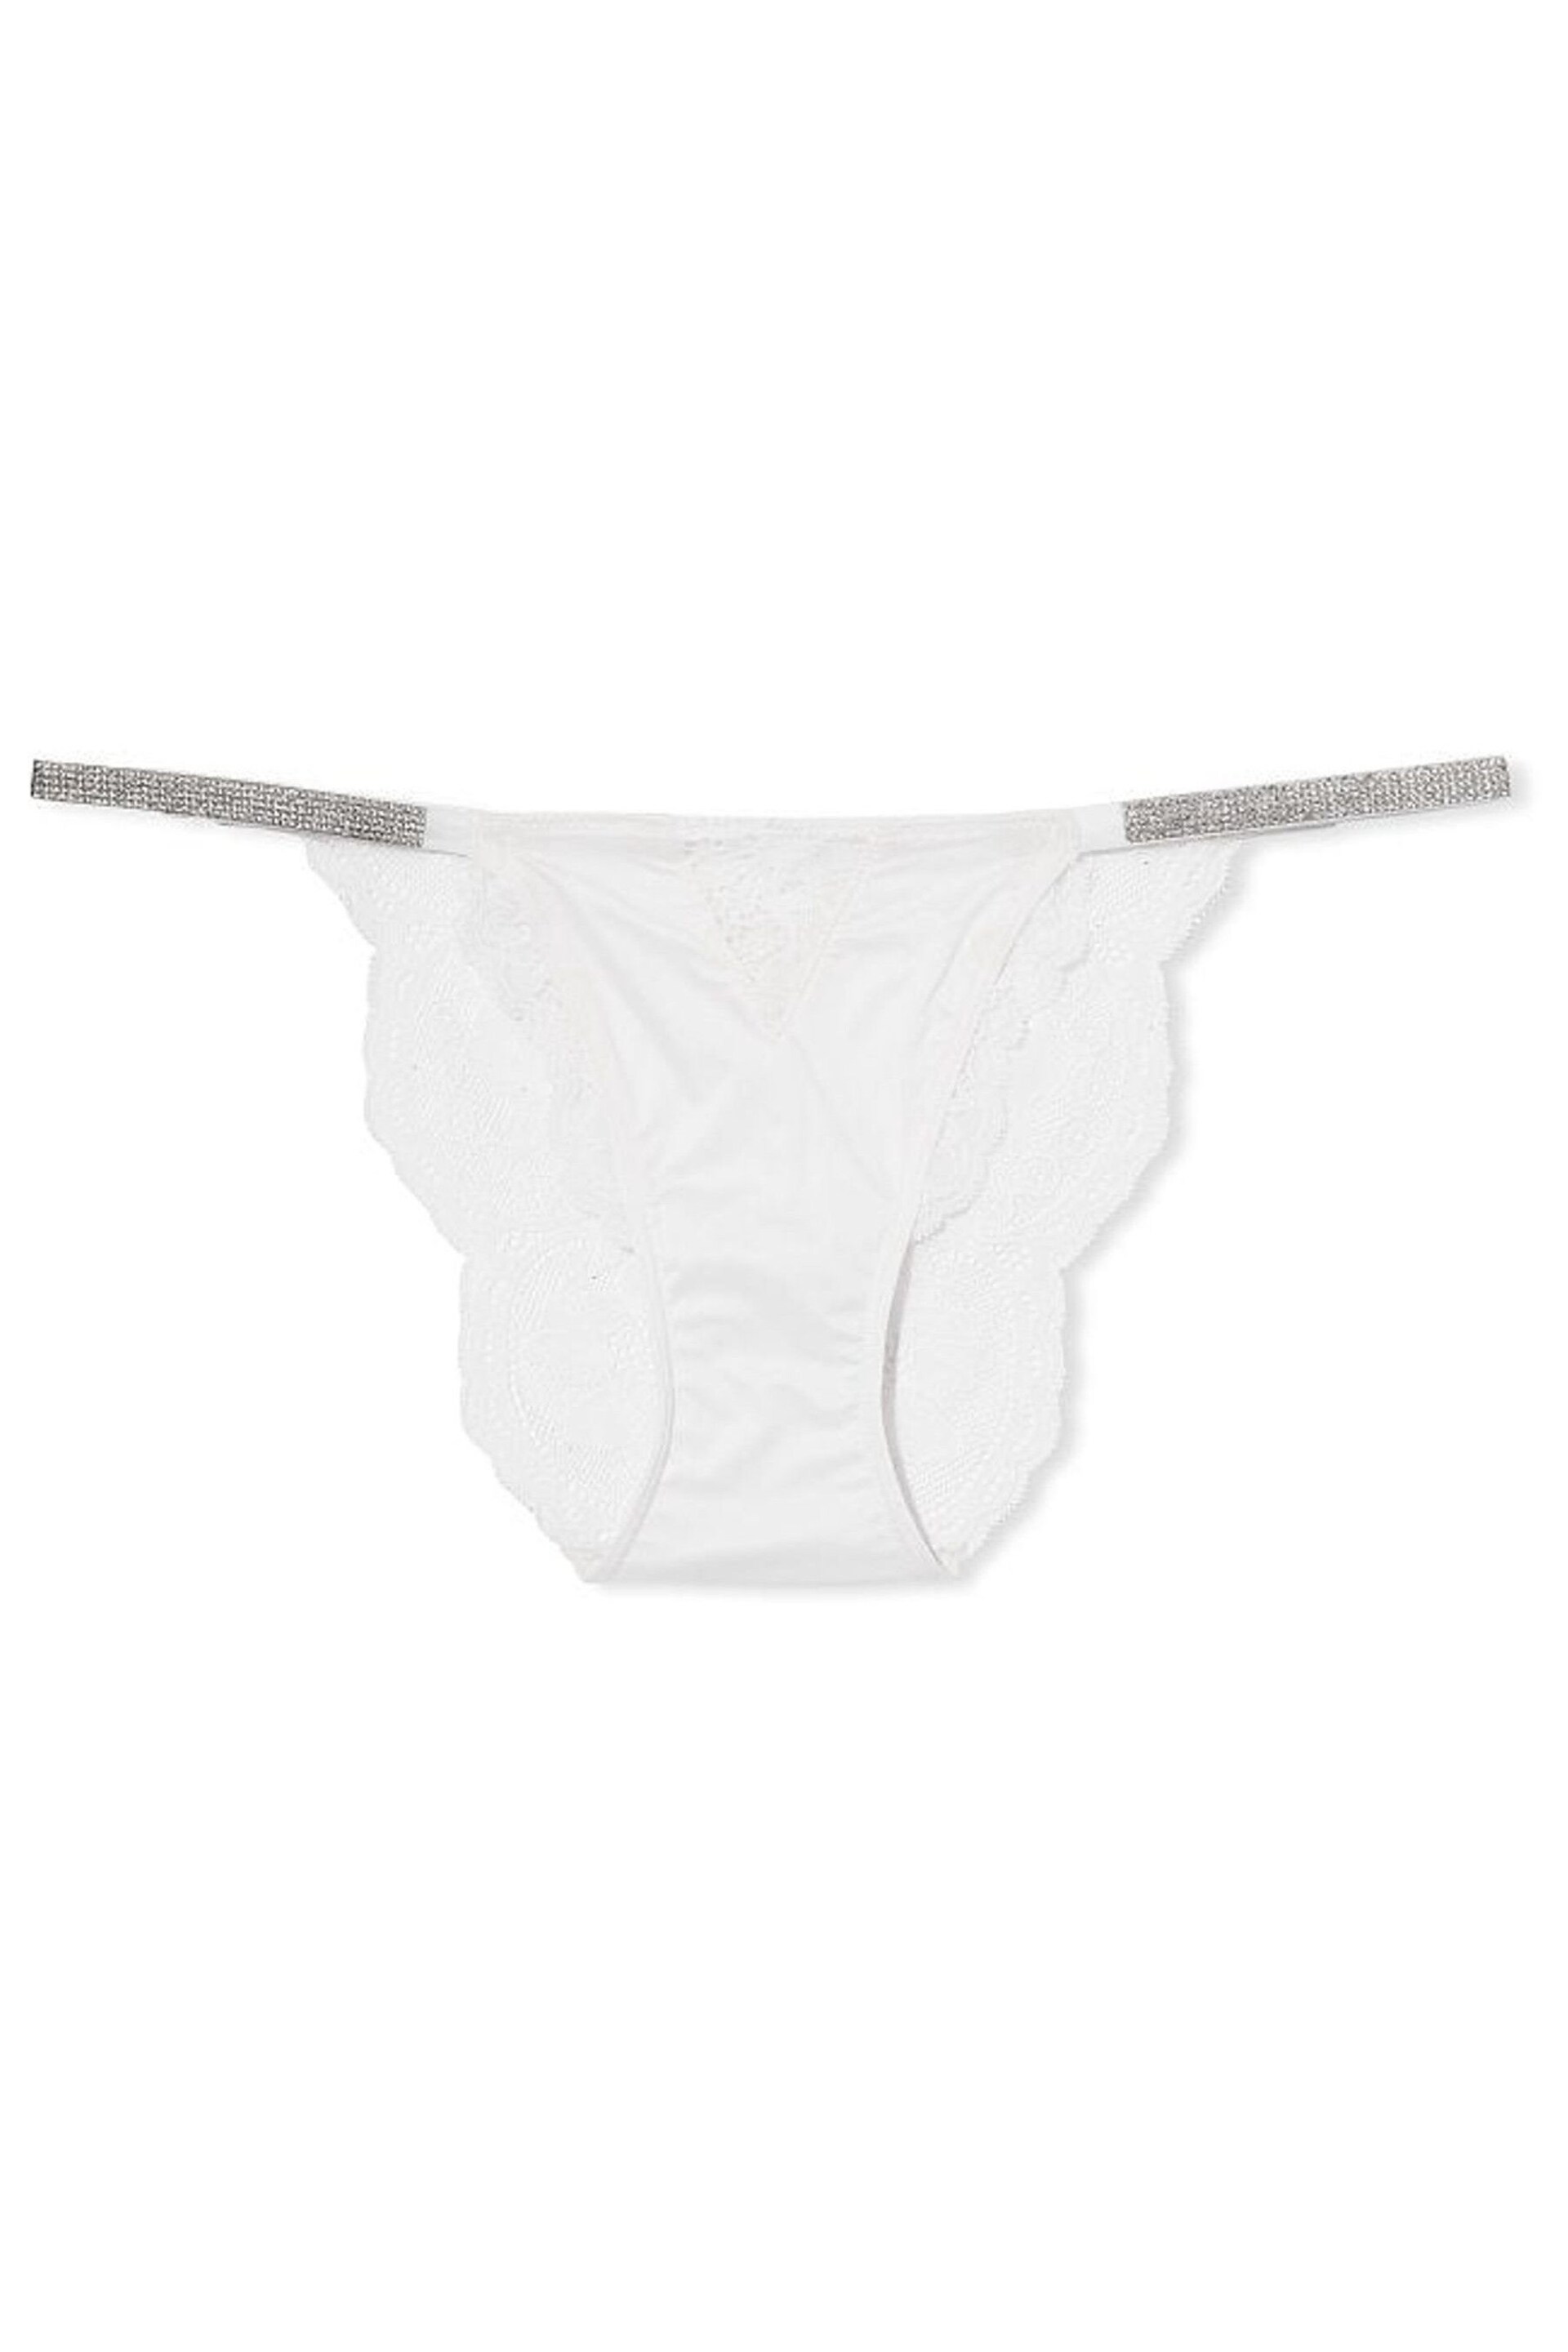 Victoria's Secret Coconut White Smooth Cheeky Shine Strap Knickers - Image 3 of 3